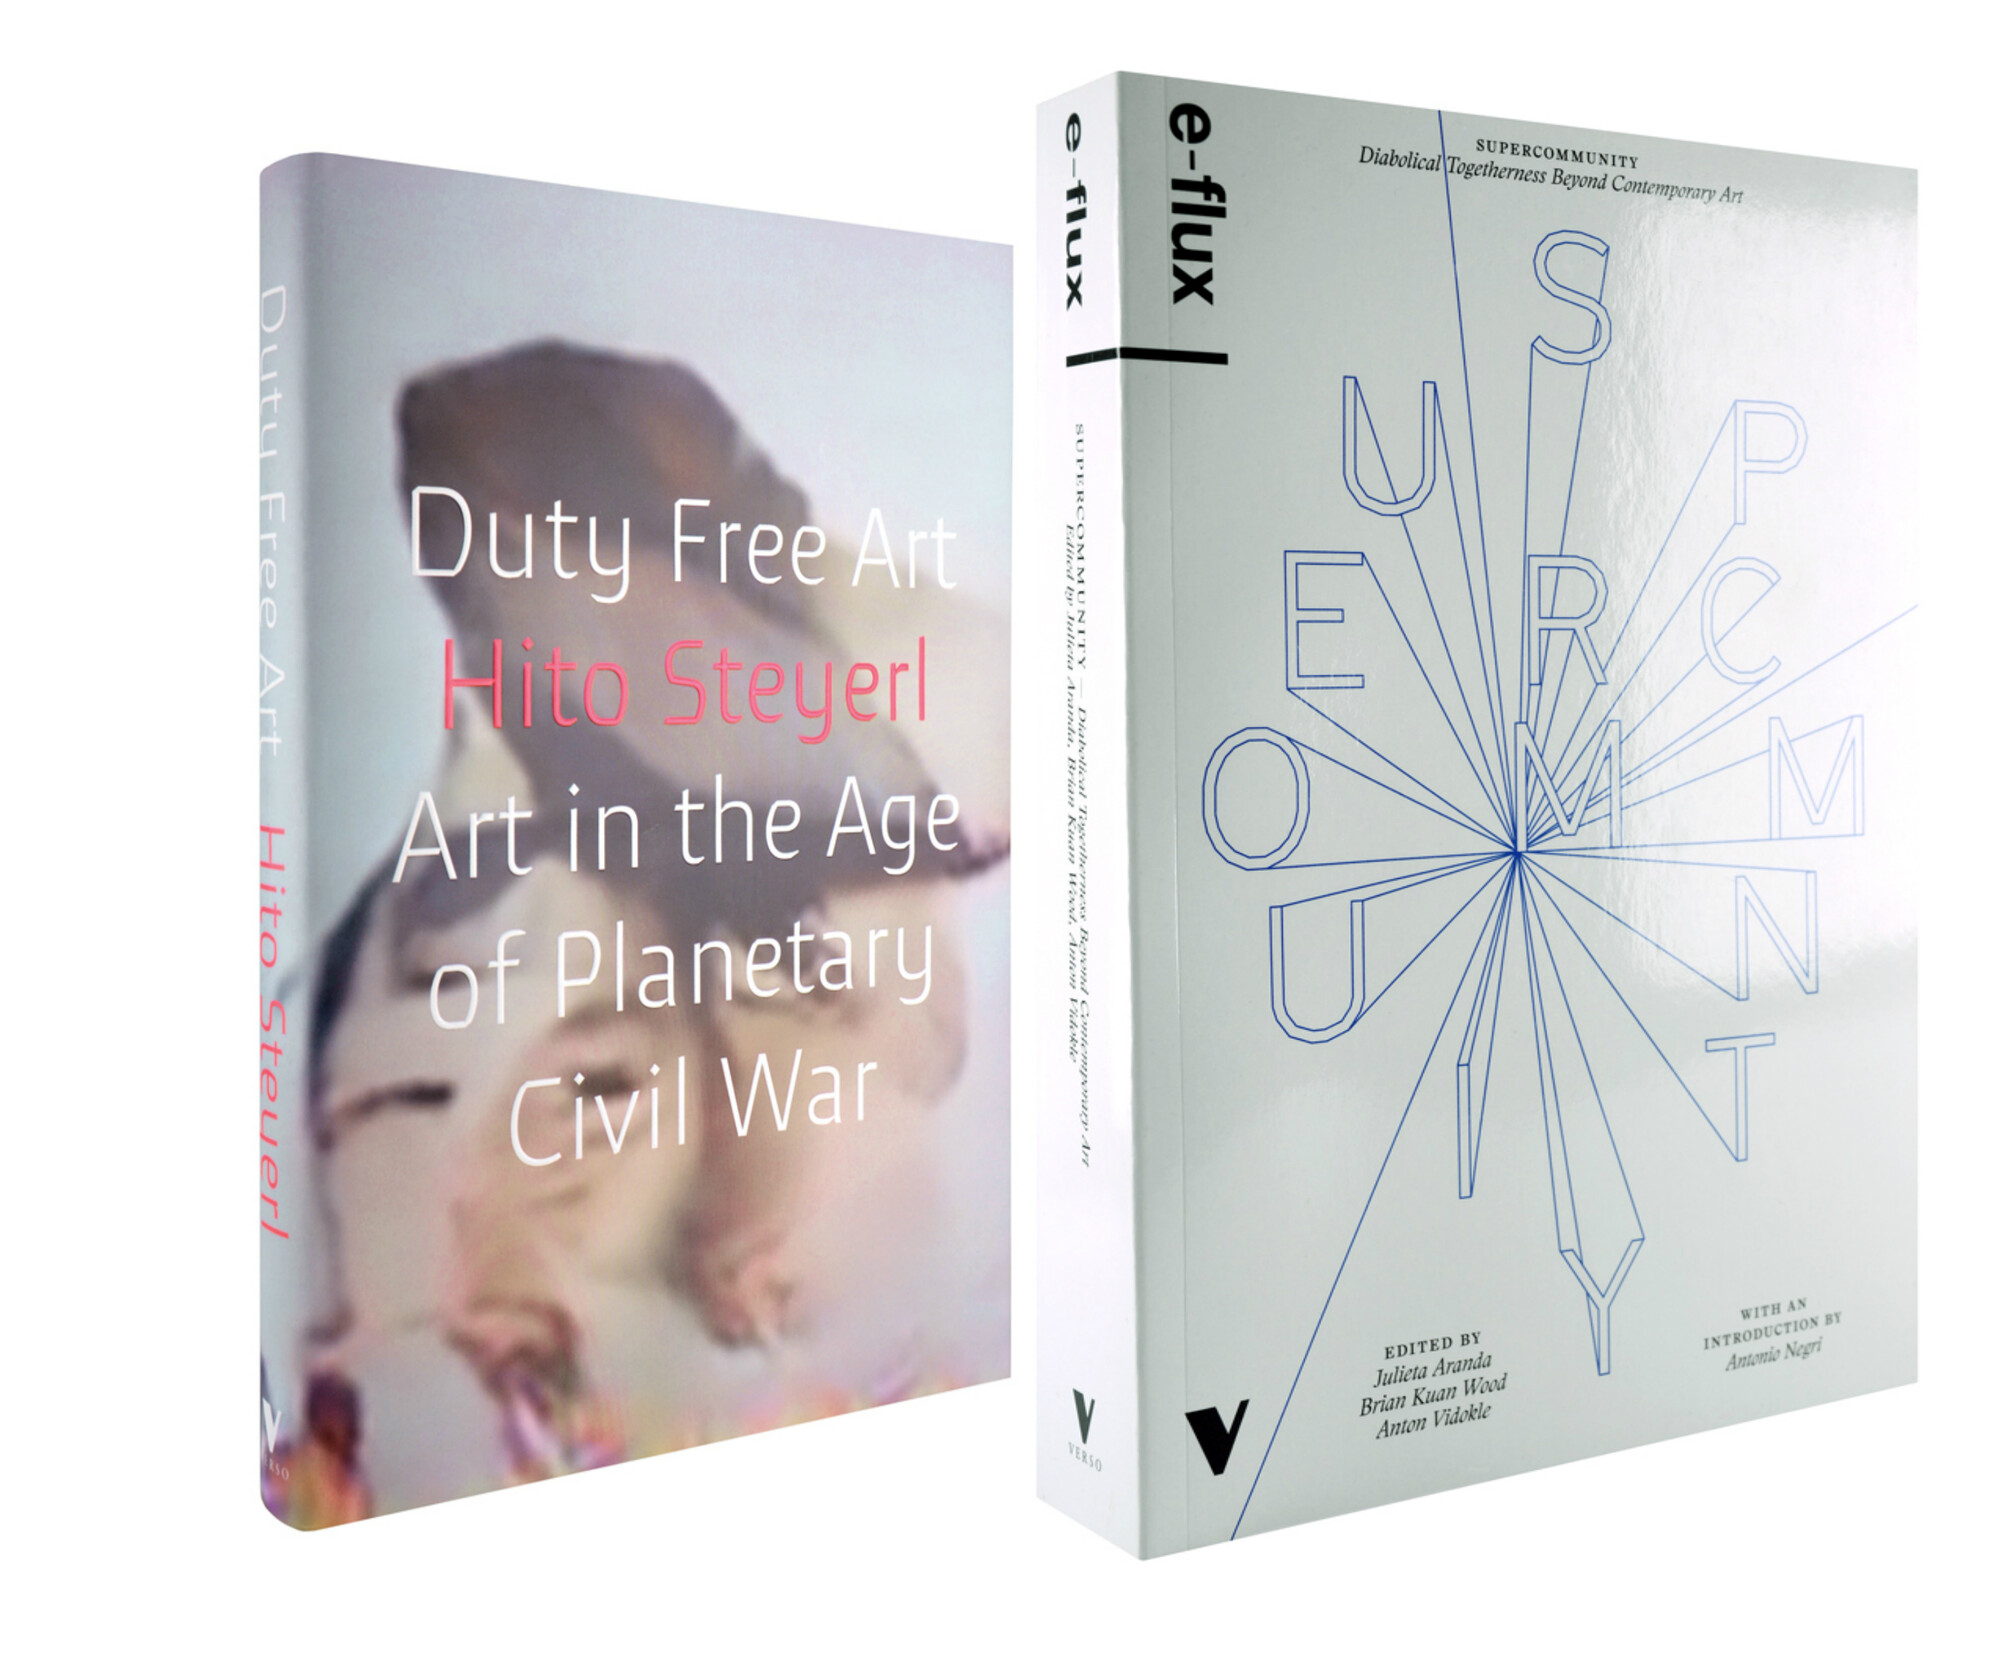 Double U S Book Launch Duty Free Art And Supercommunity At The Guggenheim Video Film E Flux